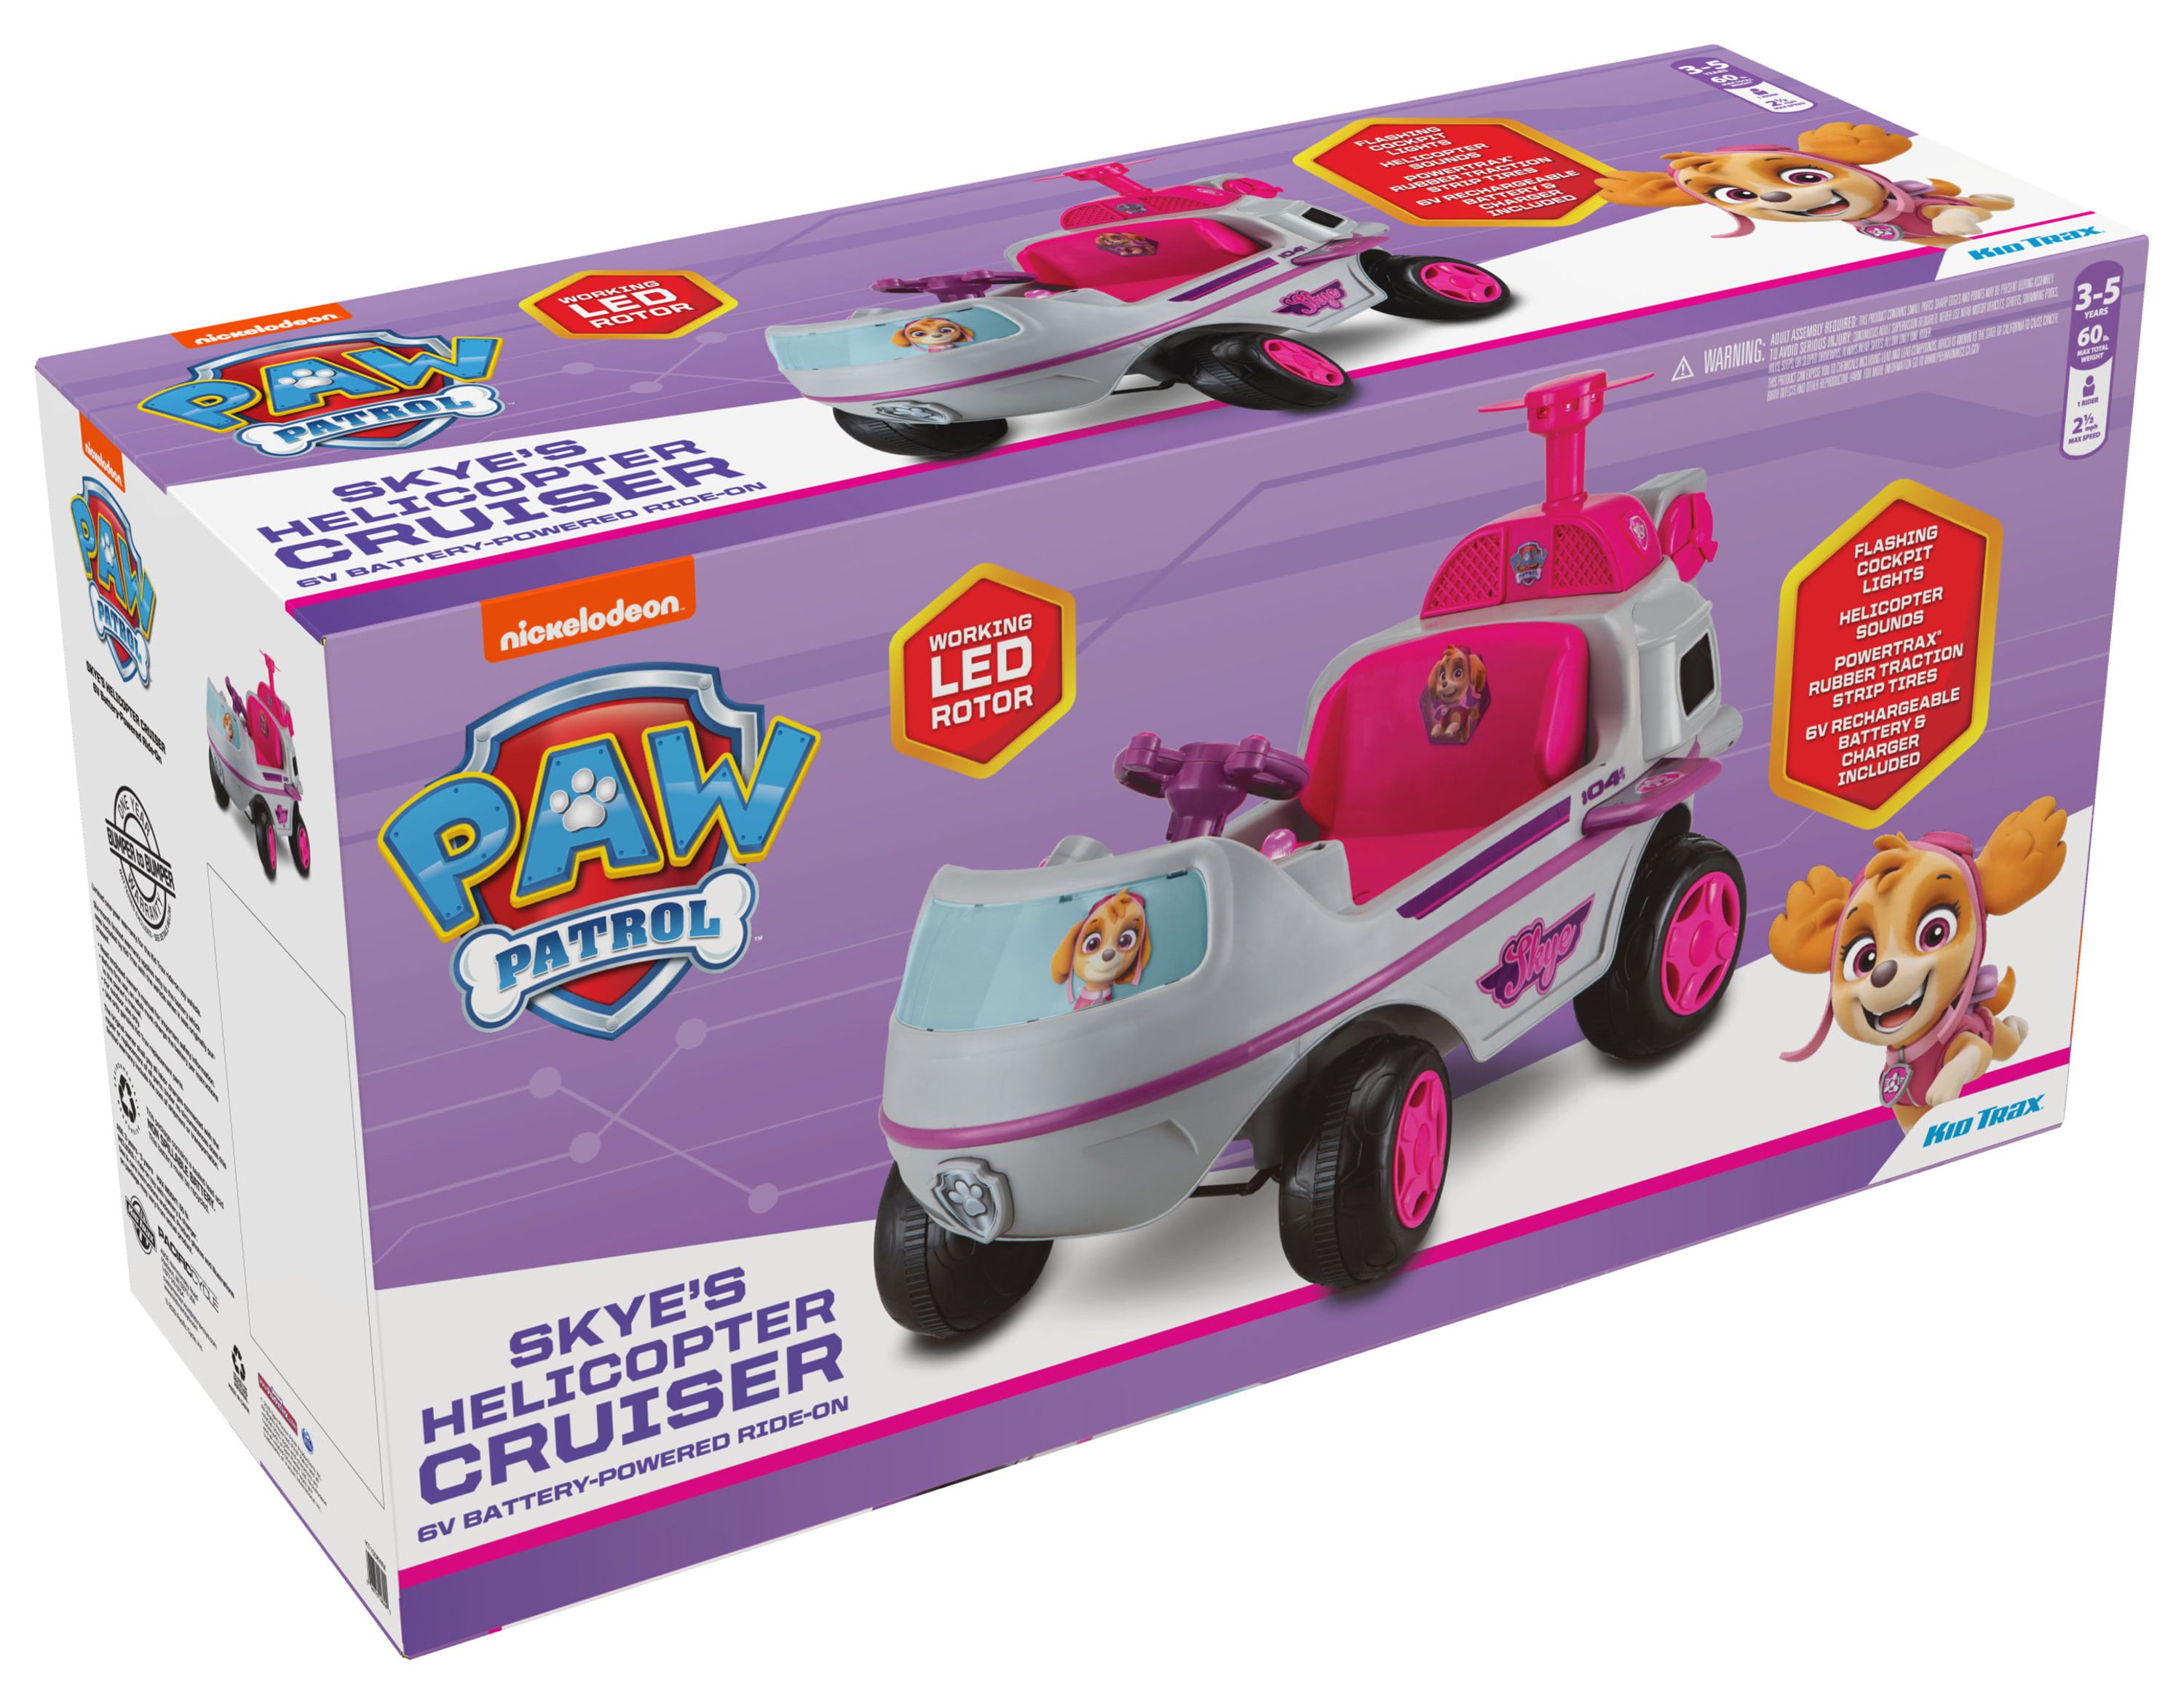 Nickelodeon’s PAW Patrol: Skye Helicopter, 6-Volt Ride-On Toy by Kid Trax - image 5 of 8